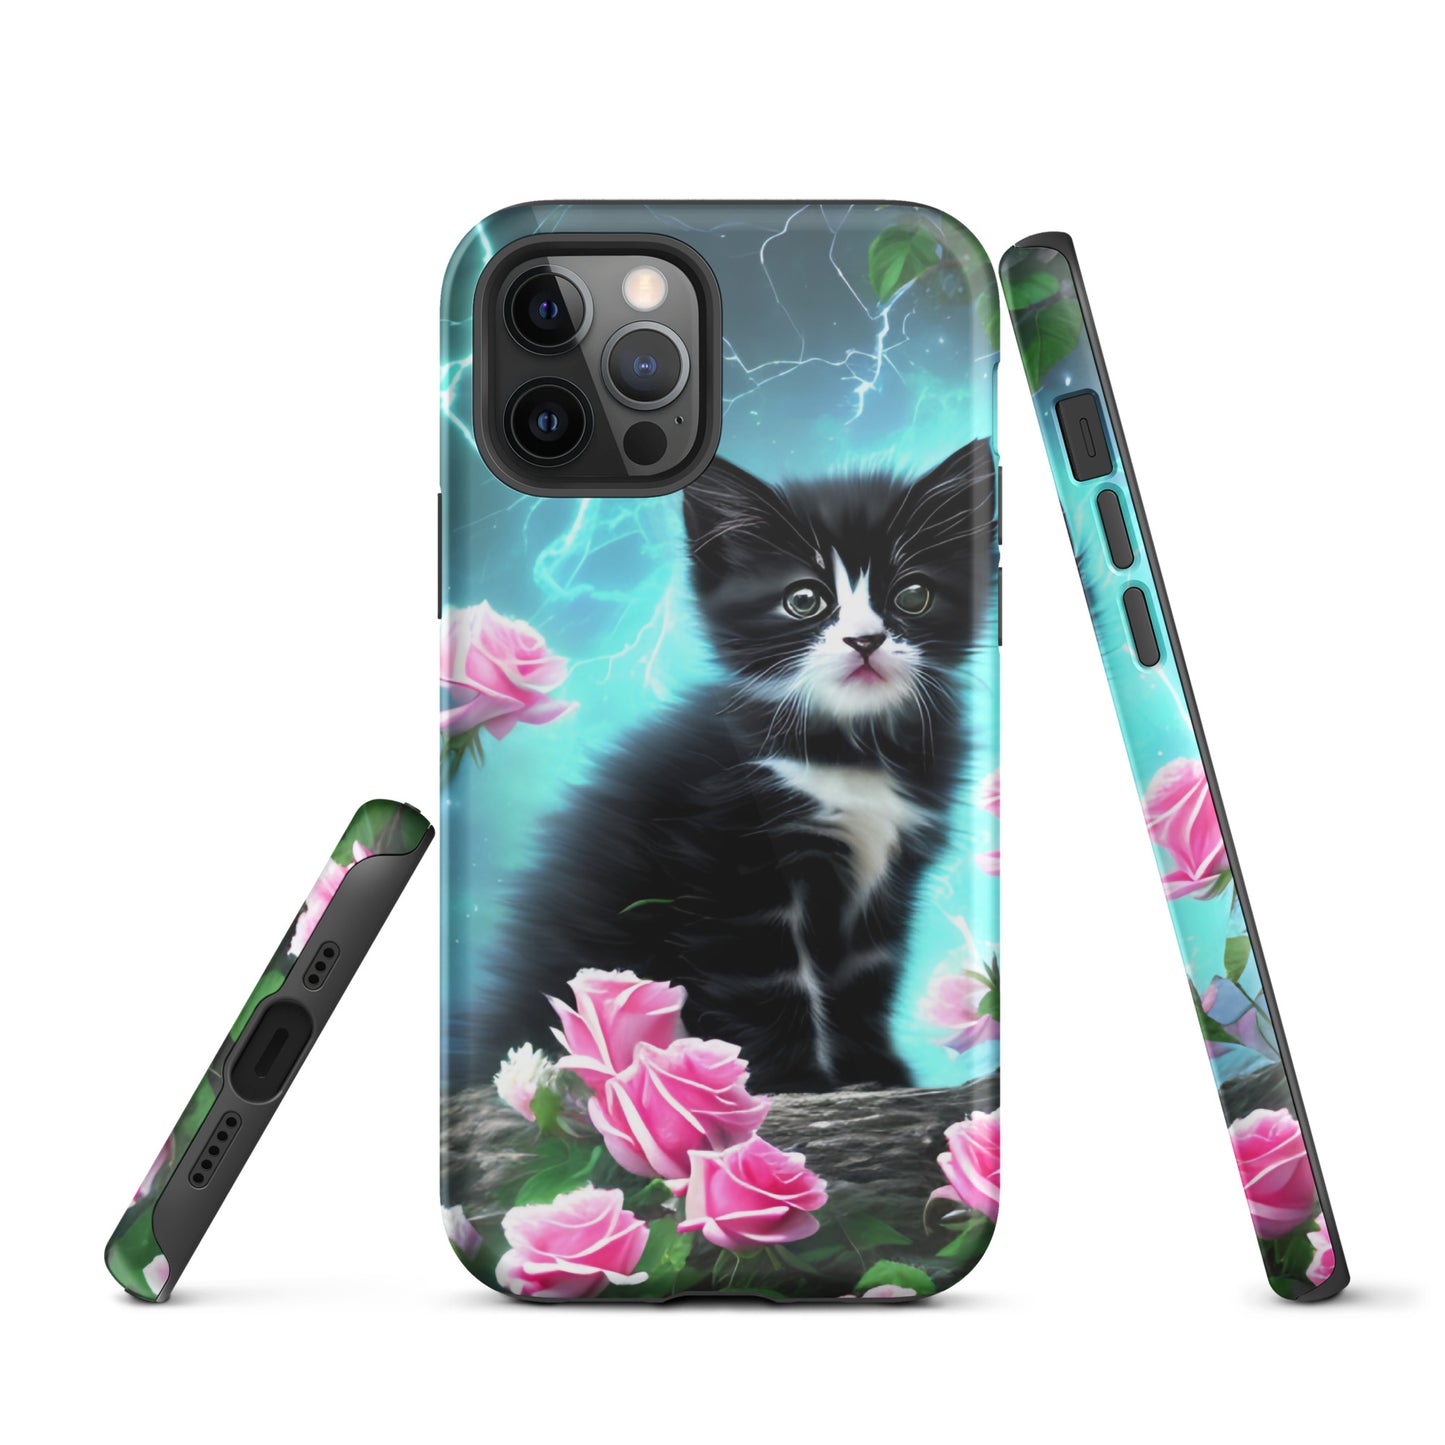 A picture of a iphone tough case with a Black and White Kitten and some pink roses - glossy-iphone-12-pro-front